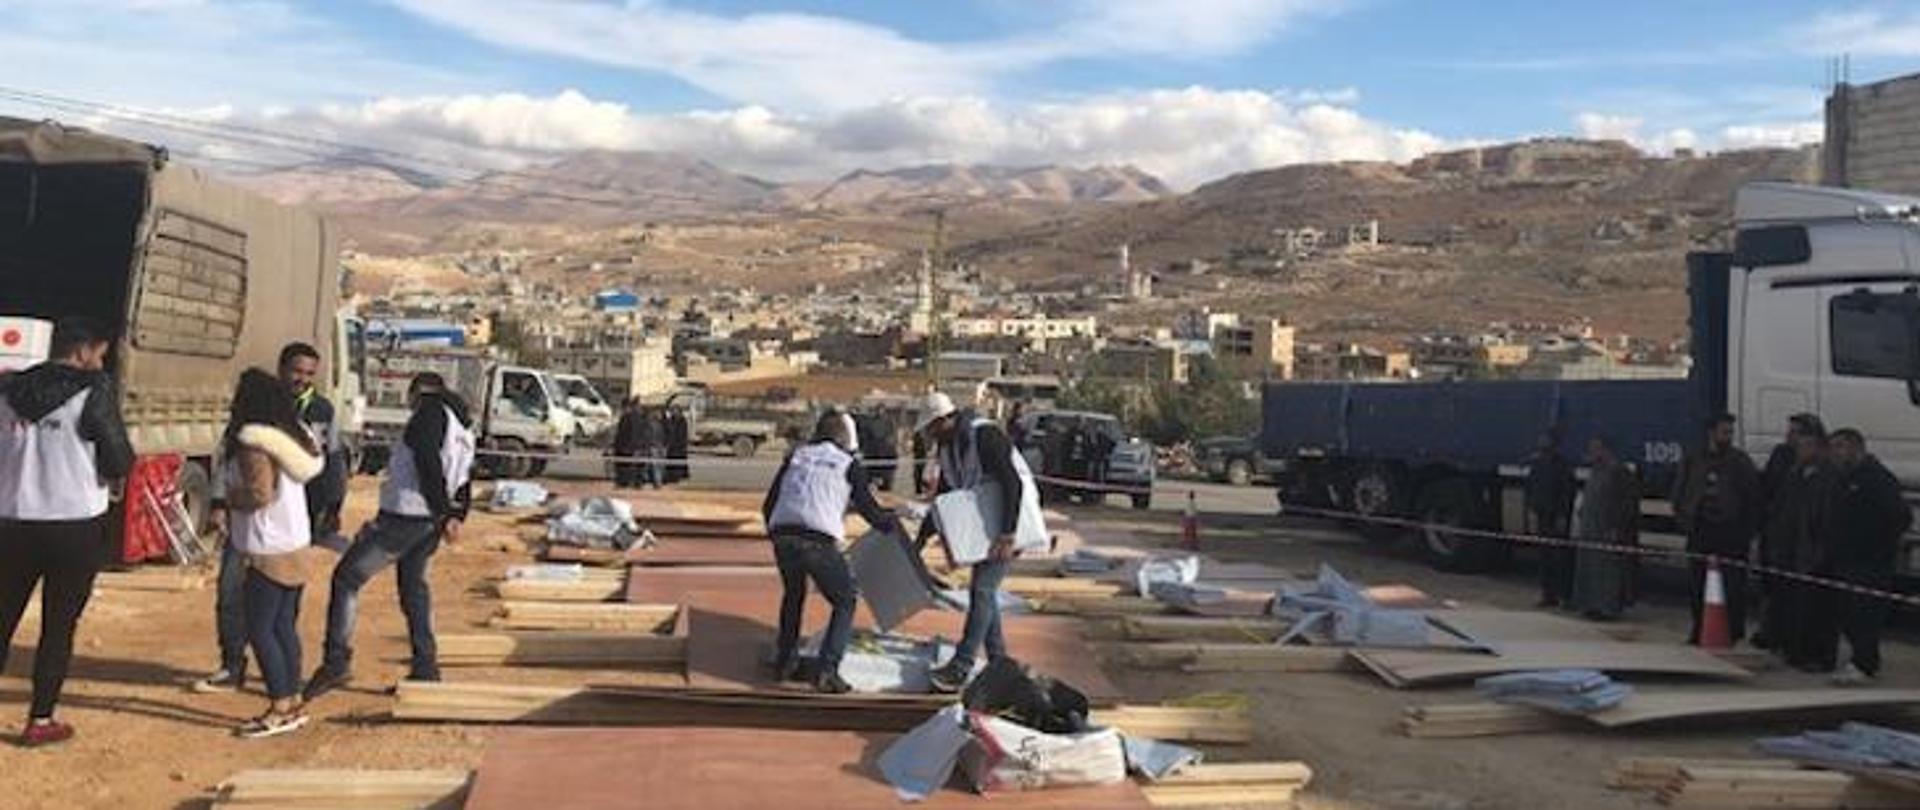 New winter shelters for 1,600 refugee families in Lebanon